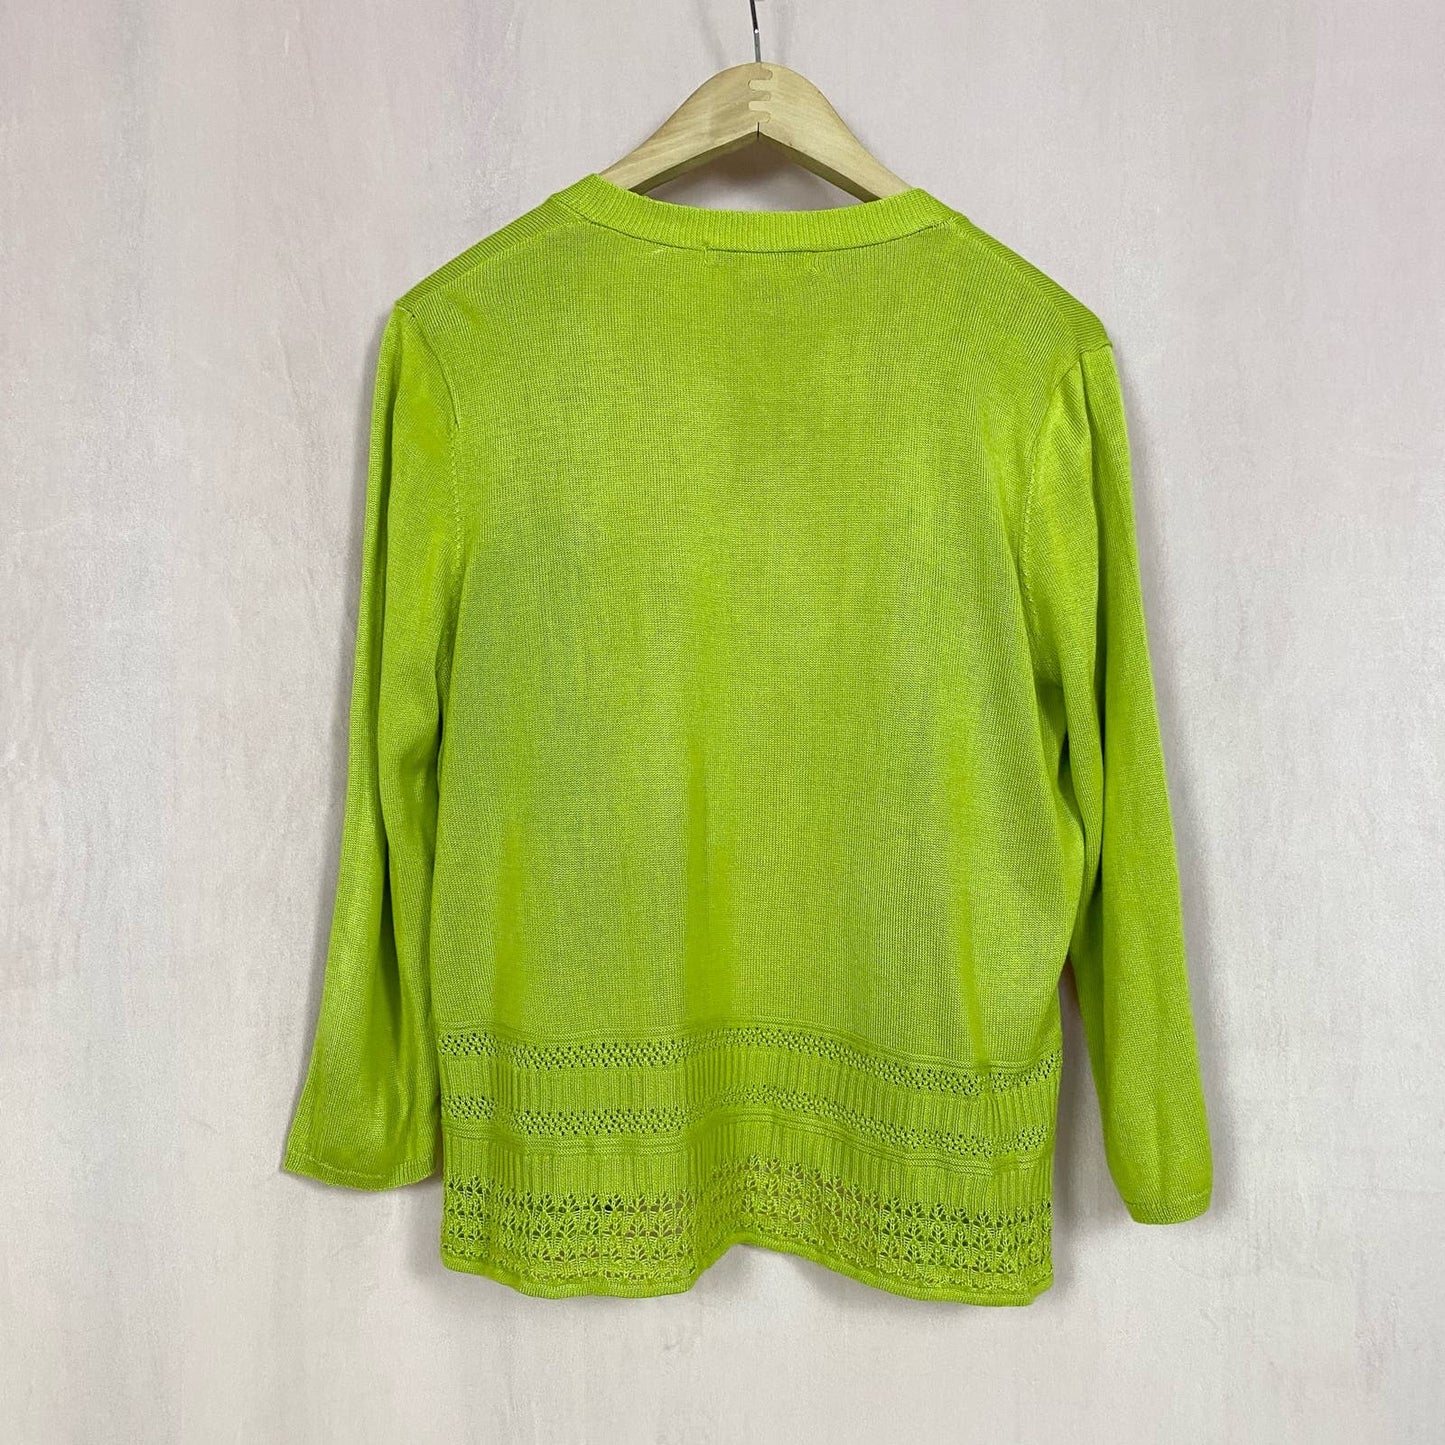 Secondhand 99 Jane Street Open Front Green Knit Cardigan Sweater, Size XL